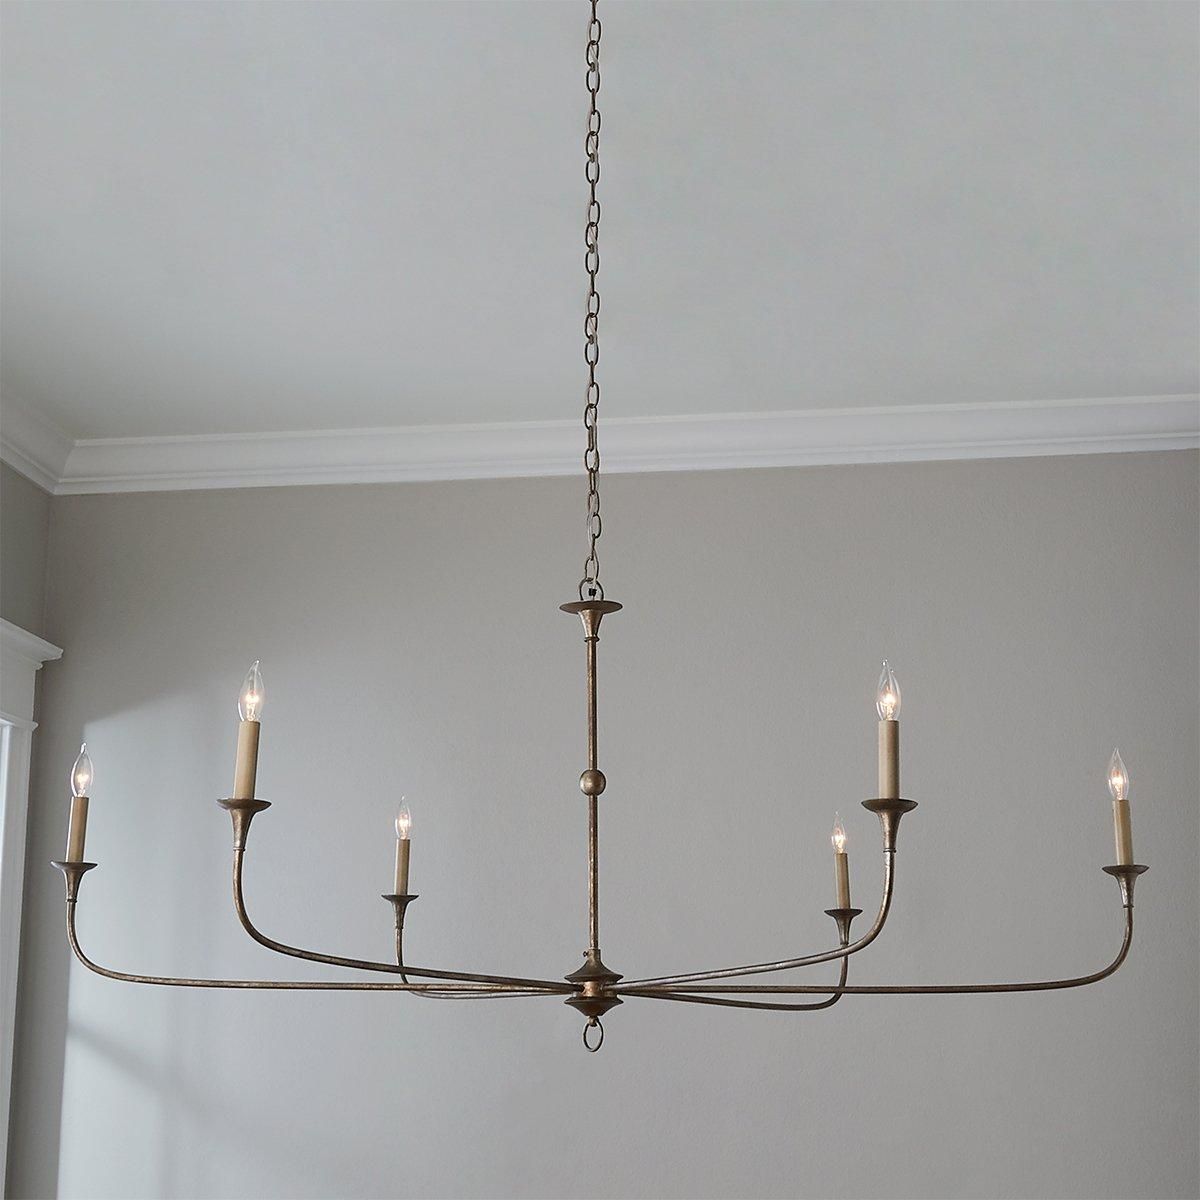 Transitional Glam Chandelier | Shades of Light